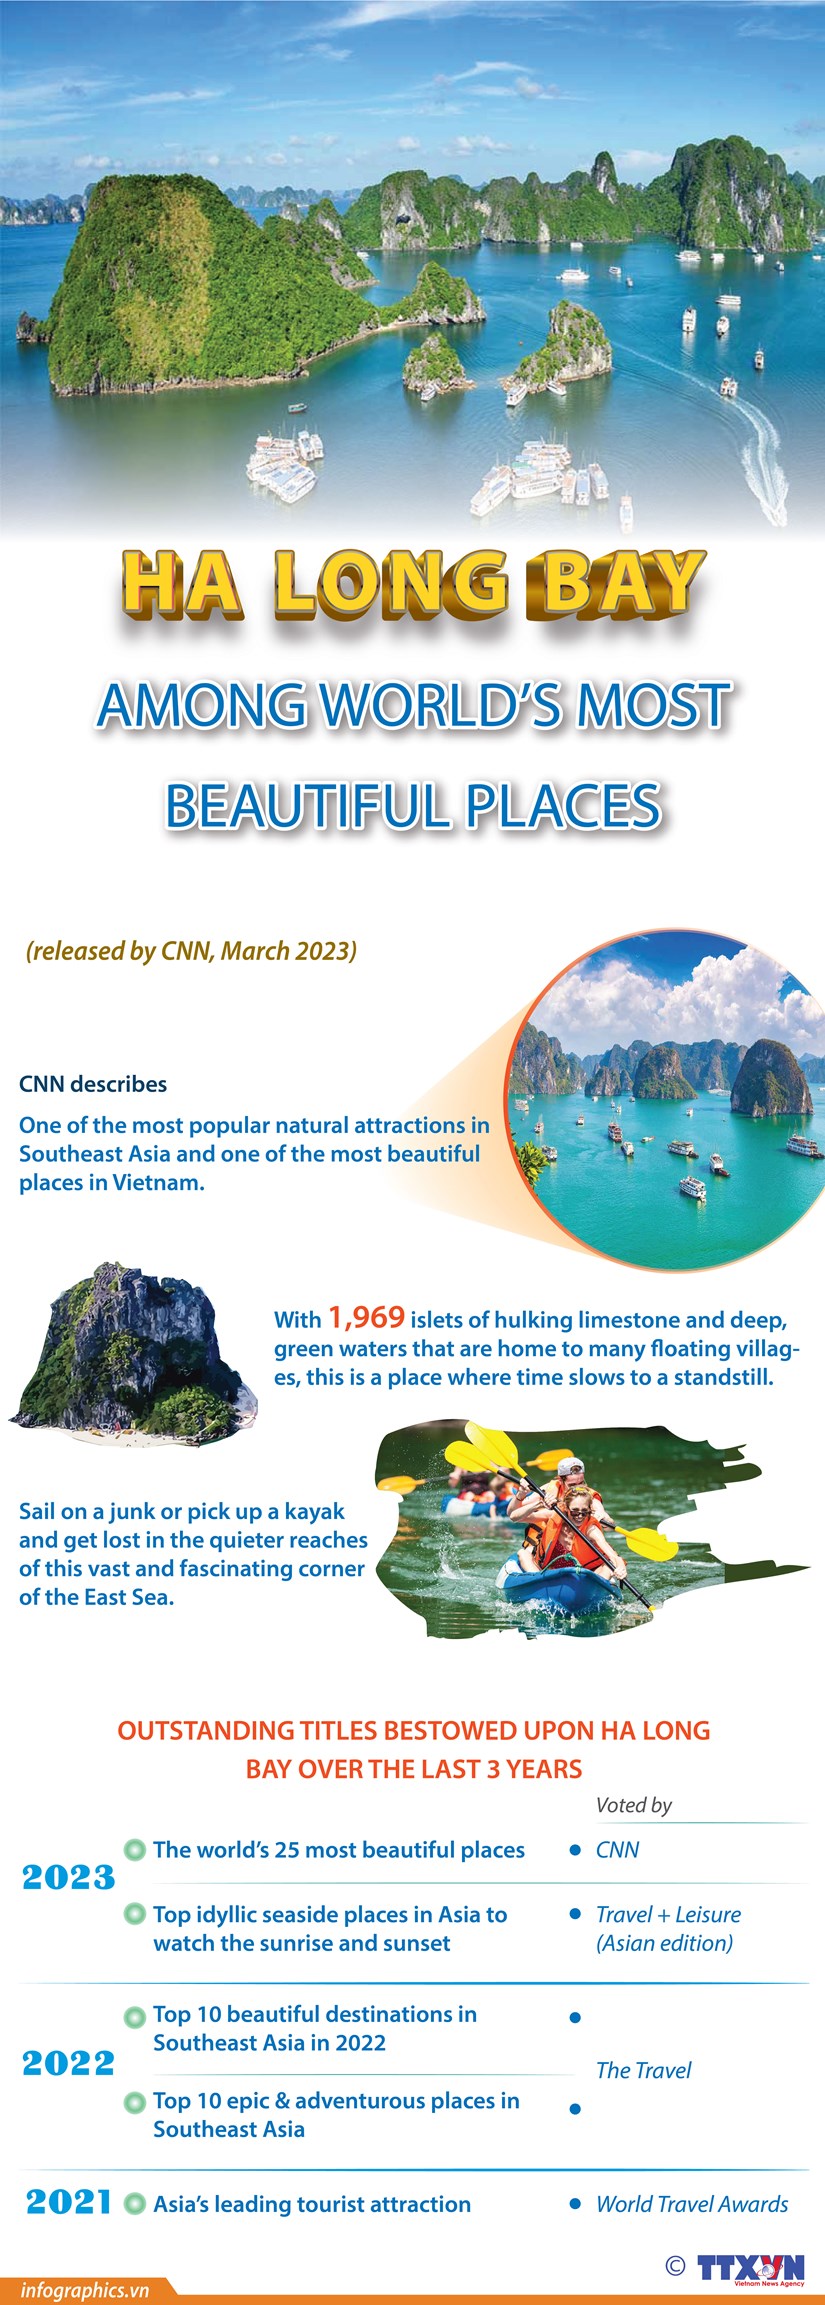 Ha Long Bay among the world’s most beautiful places: CNN hinh anh 1